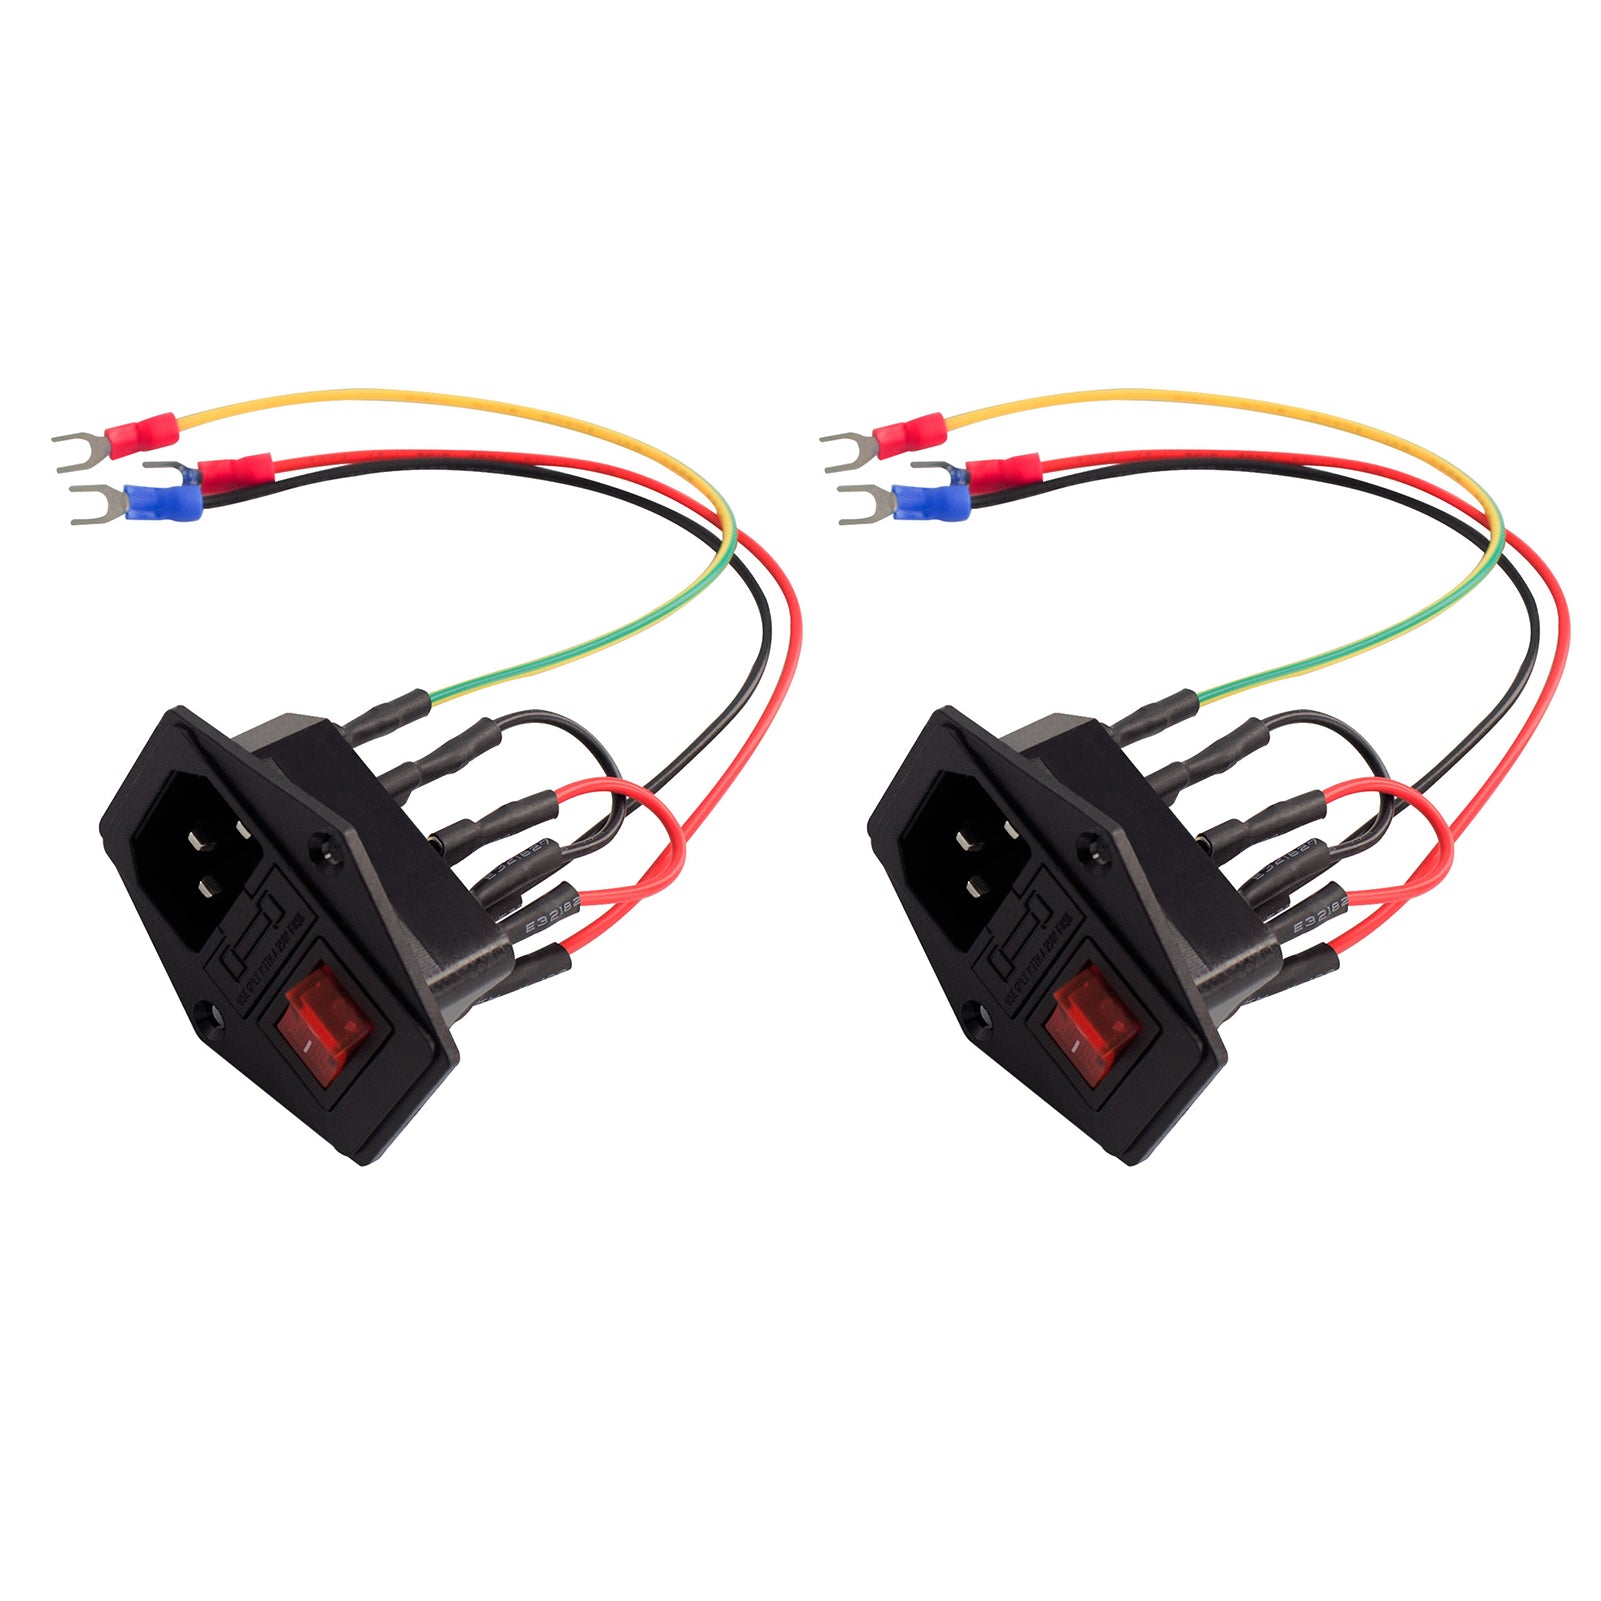 3D Printer Accessories Power Supply Switch Socket 10A 250V Rocker Switch with Fuse Cable U-Type Plug for 3D Printer